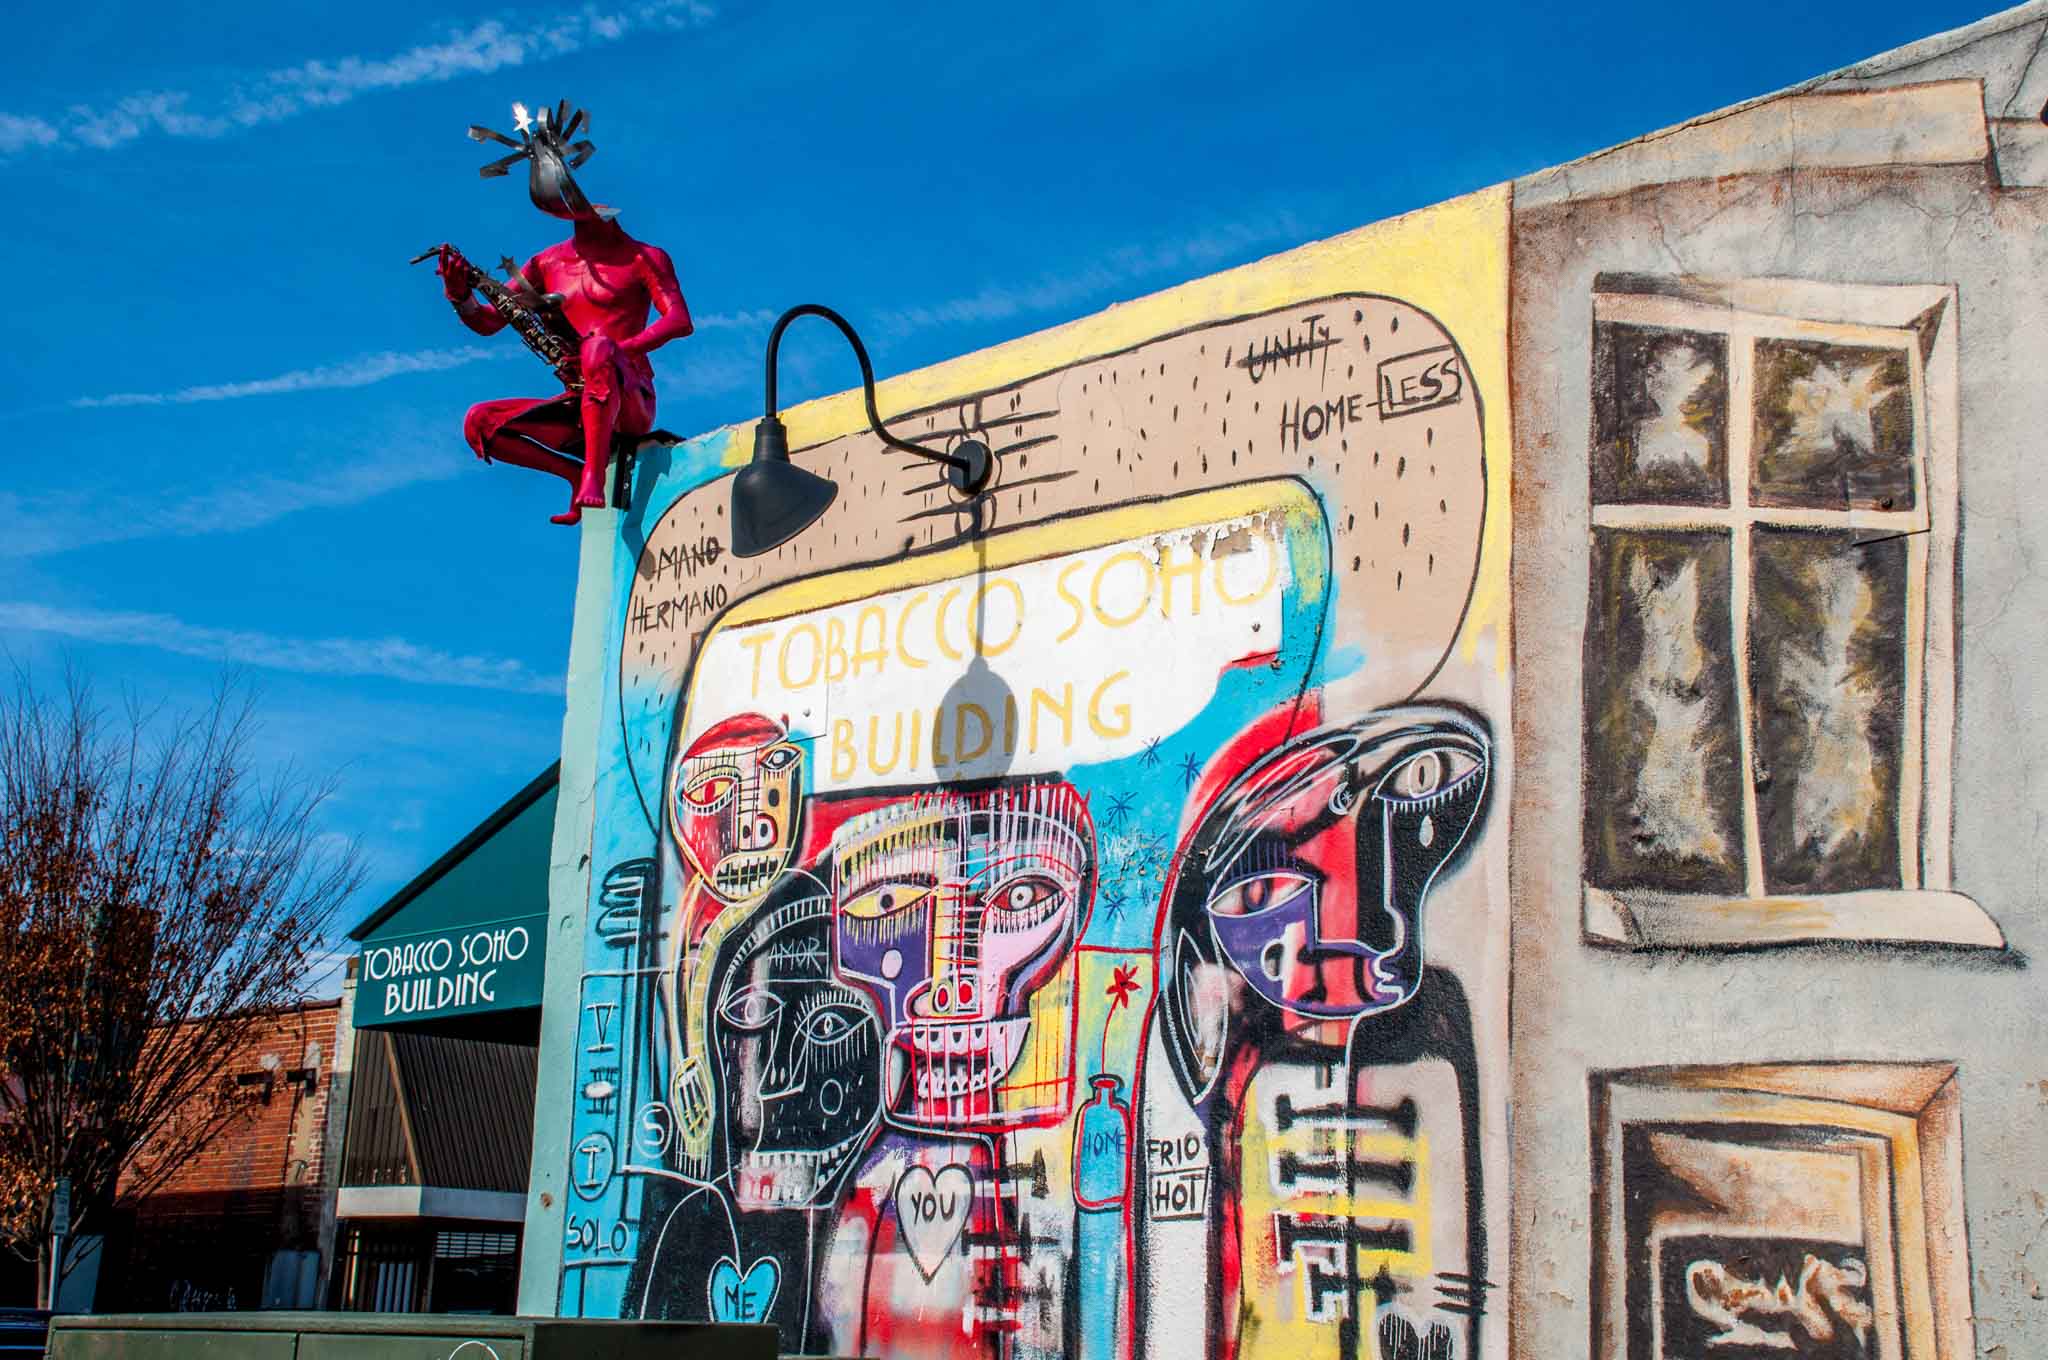 Street art mural showing colorful figures on the Tobacco Soho Building in Winston Salem NC